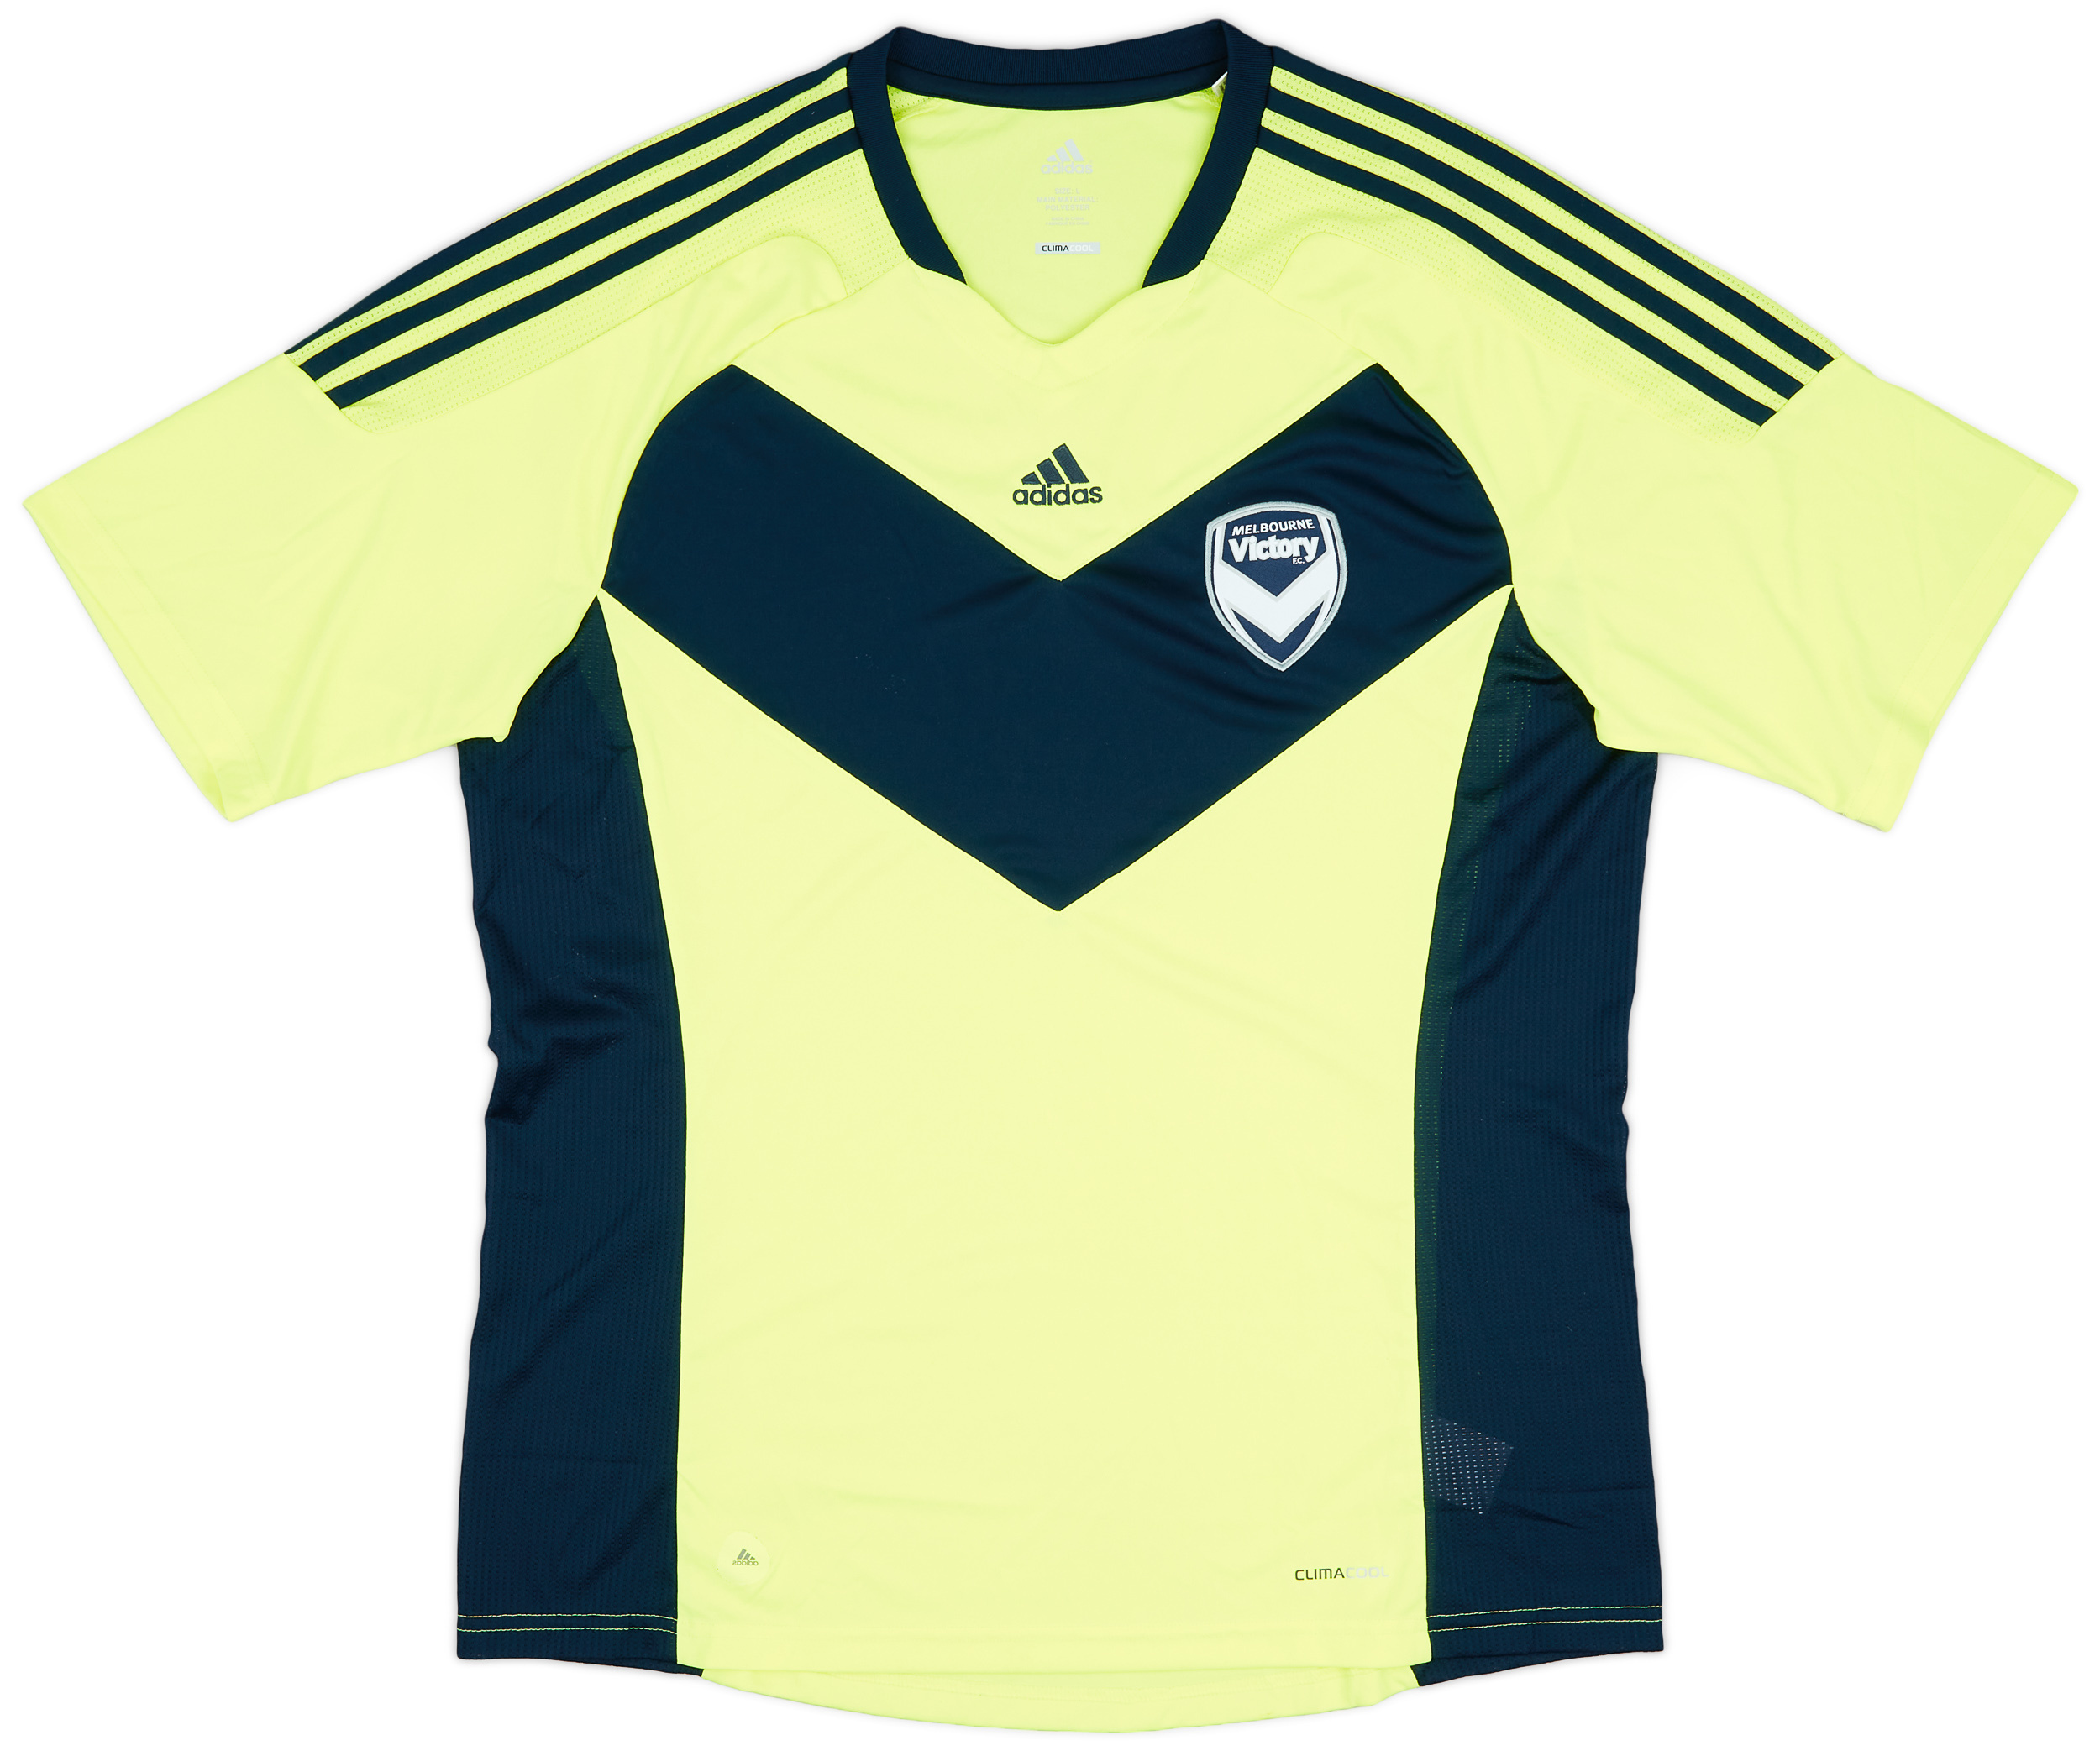 2011-12 Melbourne Victory Away Shirt - 9/10 - ()